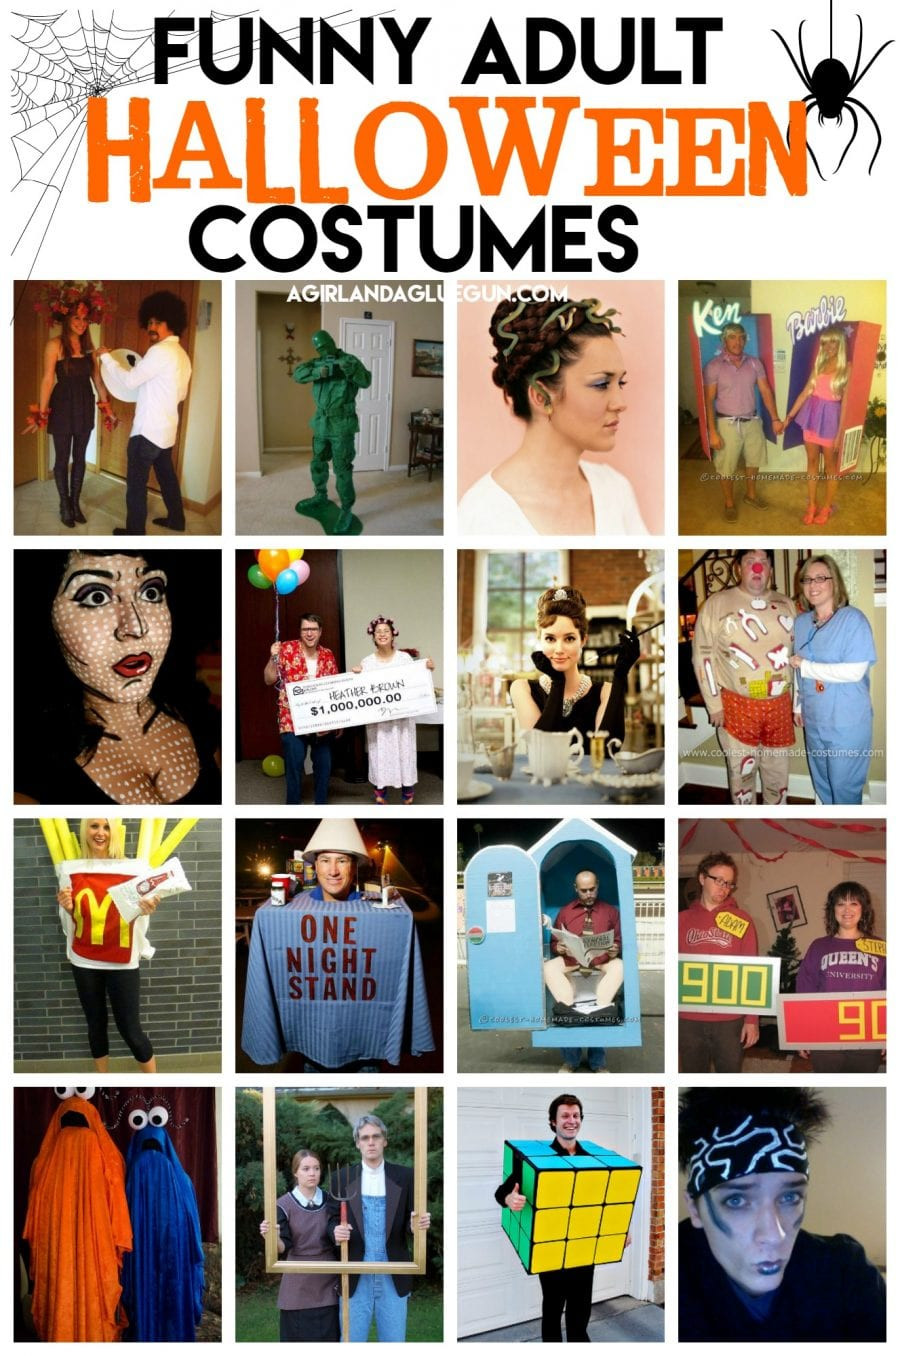 Funny Diy Halloween Costumes
 Funny Halloween Costumes for Adults that you can DIY A